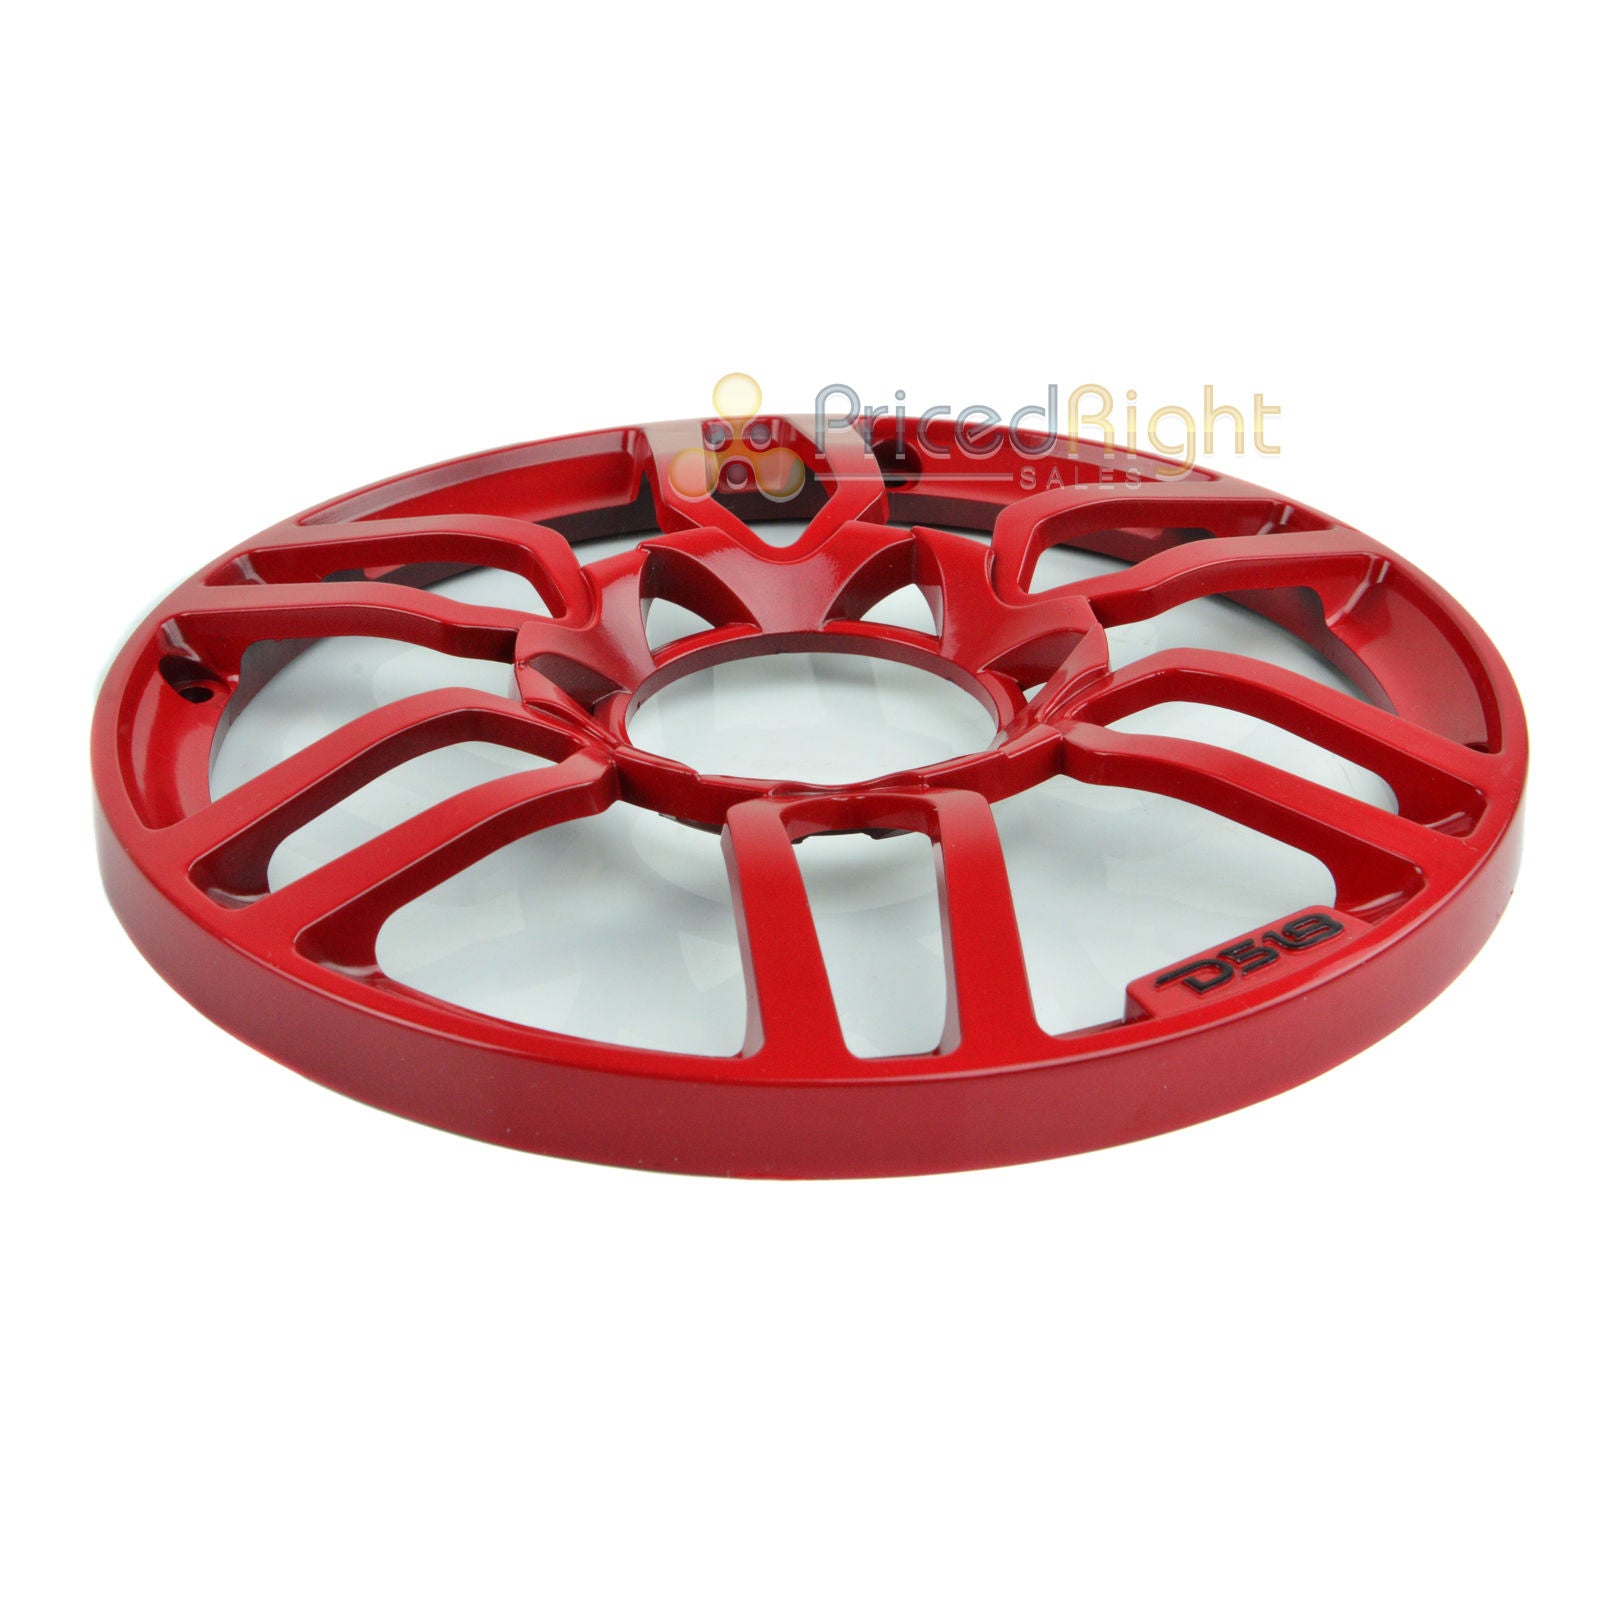 Ds18 Universal 10" Inch Plastic Speaker Grill Cover Red Set of 2 Pro Grill10